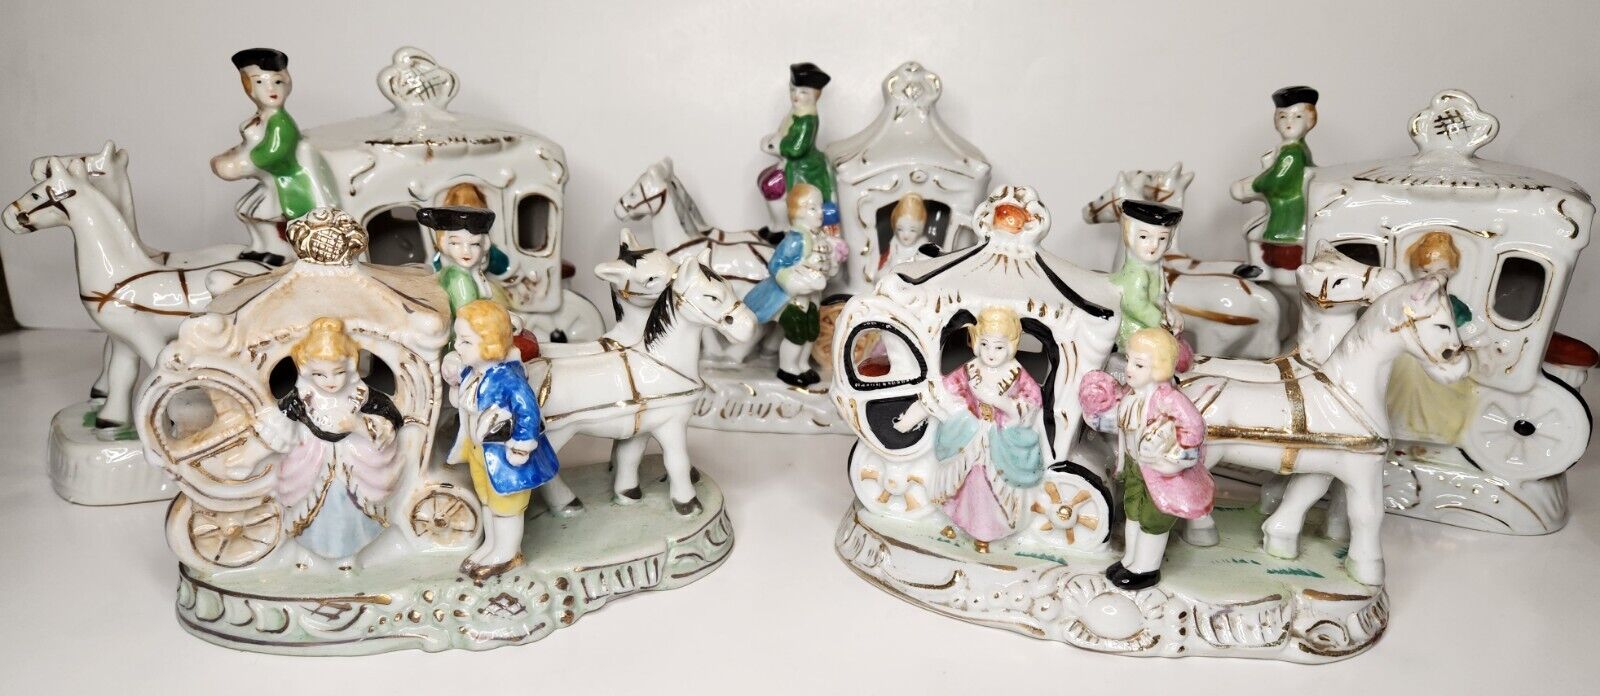 Vintage Porcelain Figurine Horse Drawn Carriage / Coach Made In Japan Lot Of 5